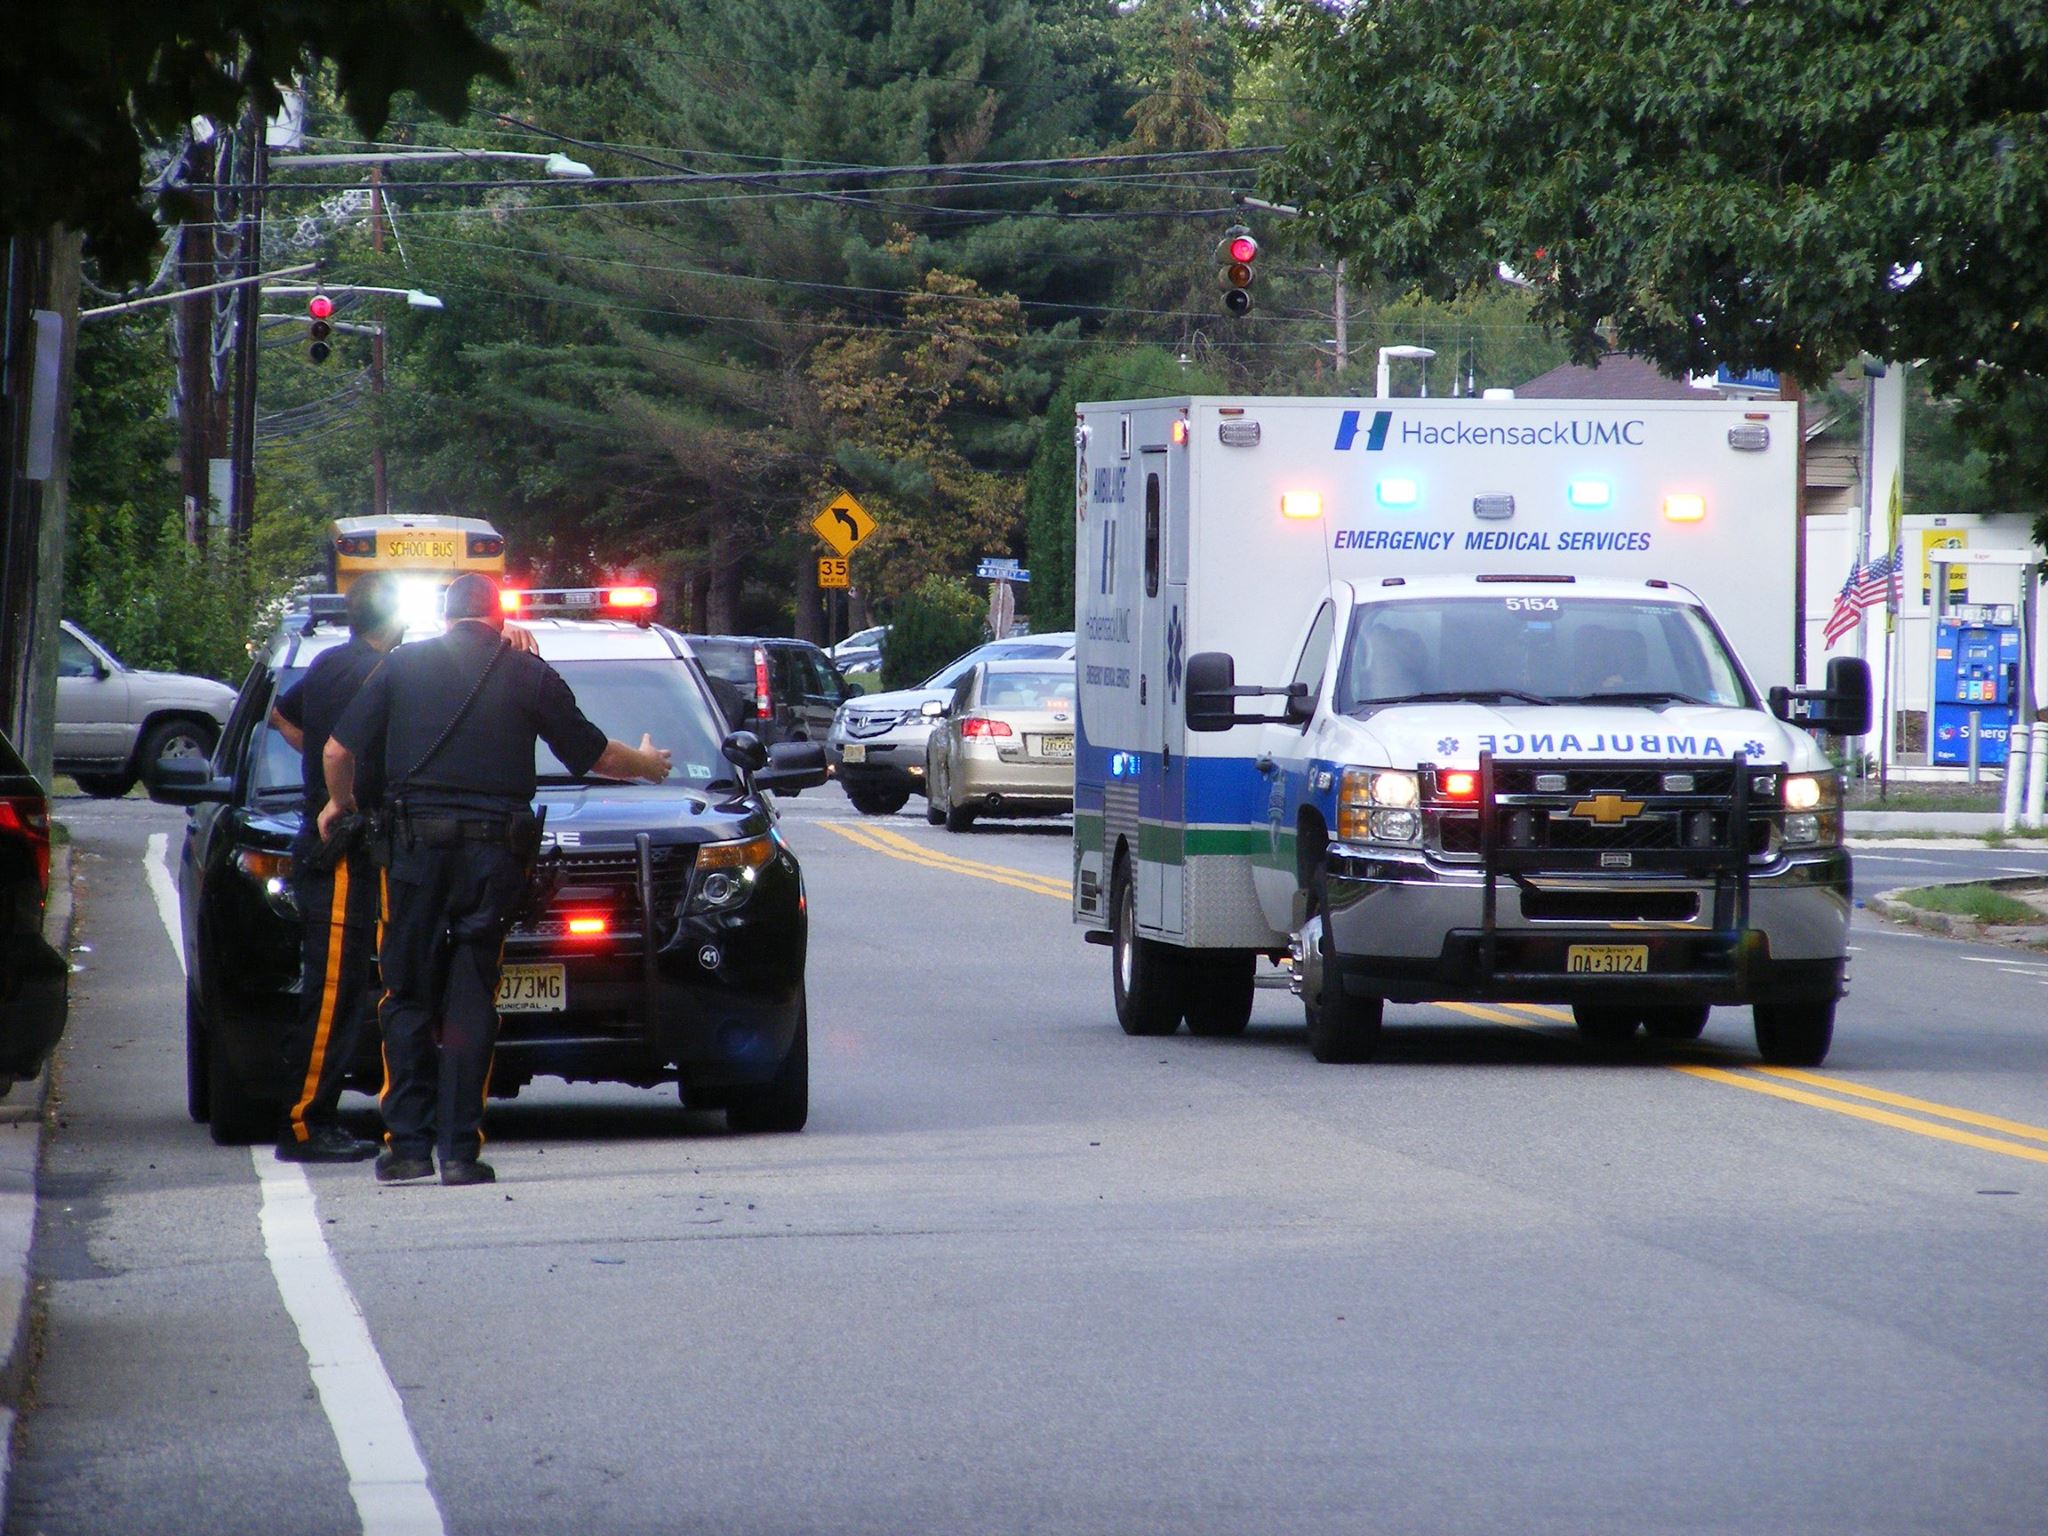 Washington Township police officer involved in a minor collision with a passenger vehicle